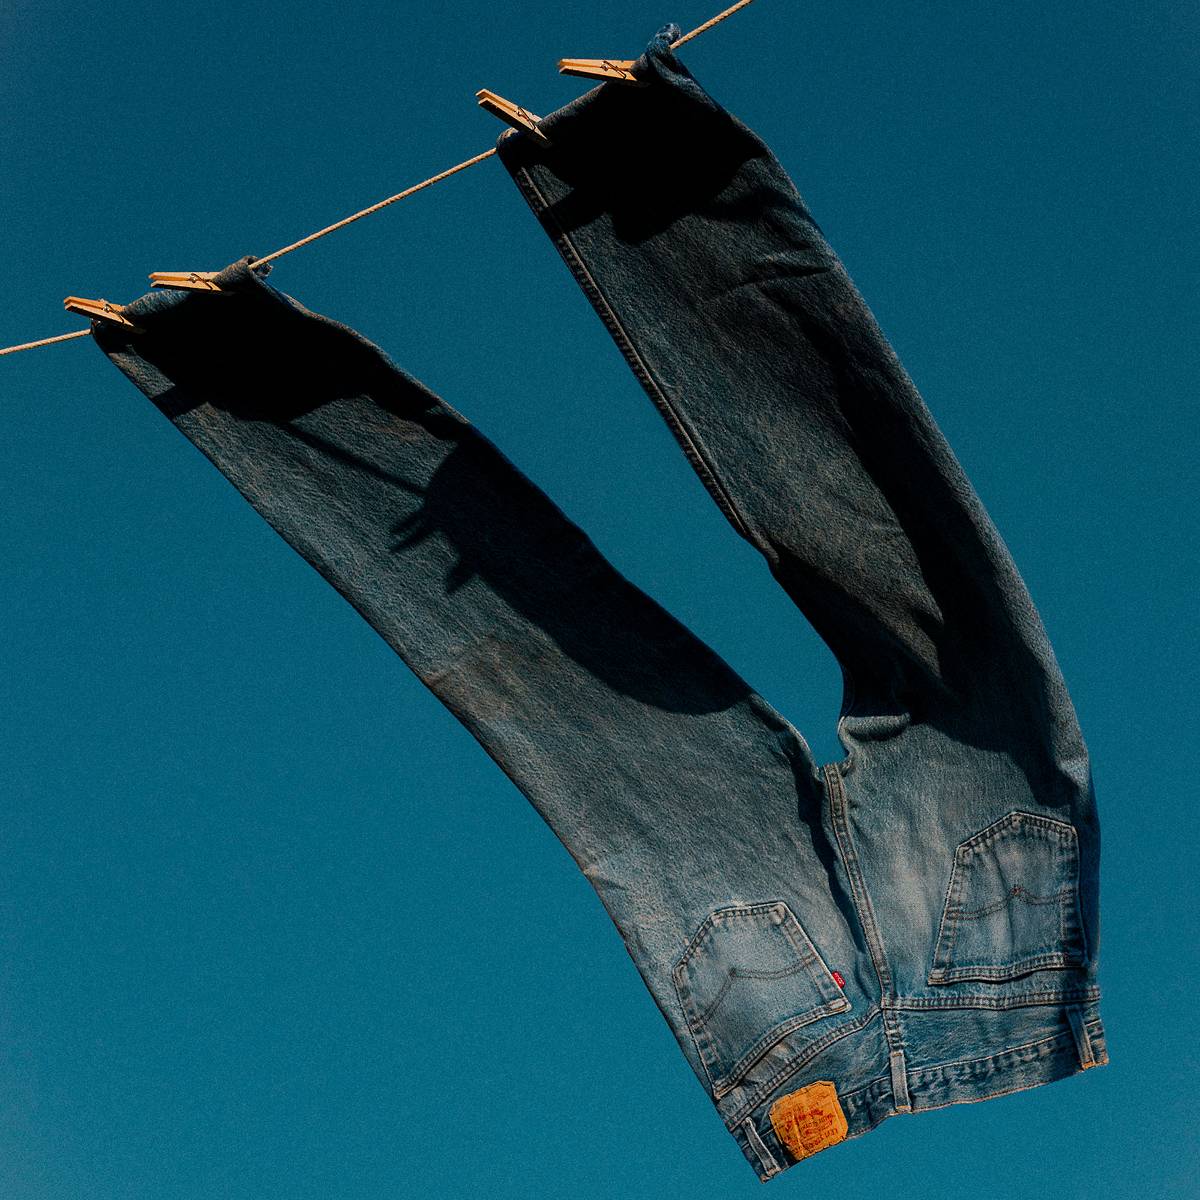 Dark wash jeans hung up to line dry